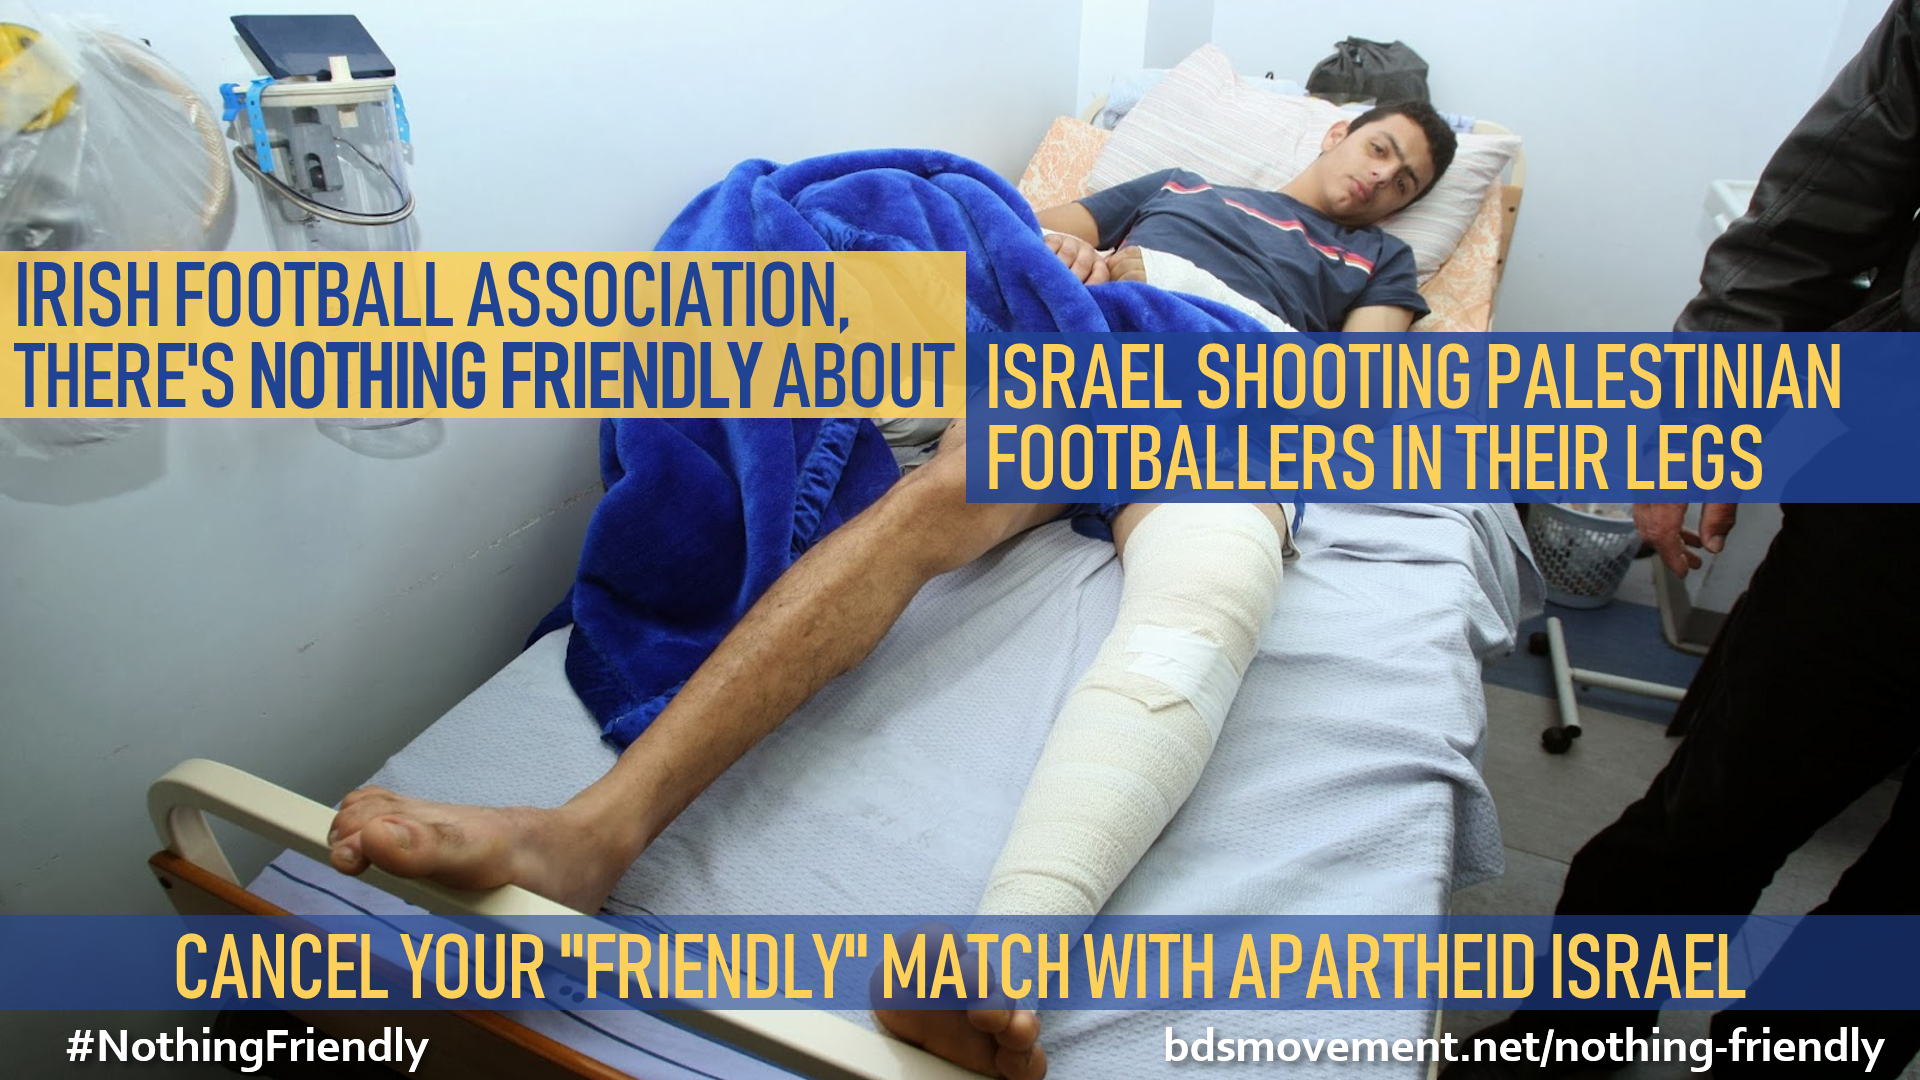 Irish Football Assoc, there's nothing friendly about shooting Palestinian footballers in their legs